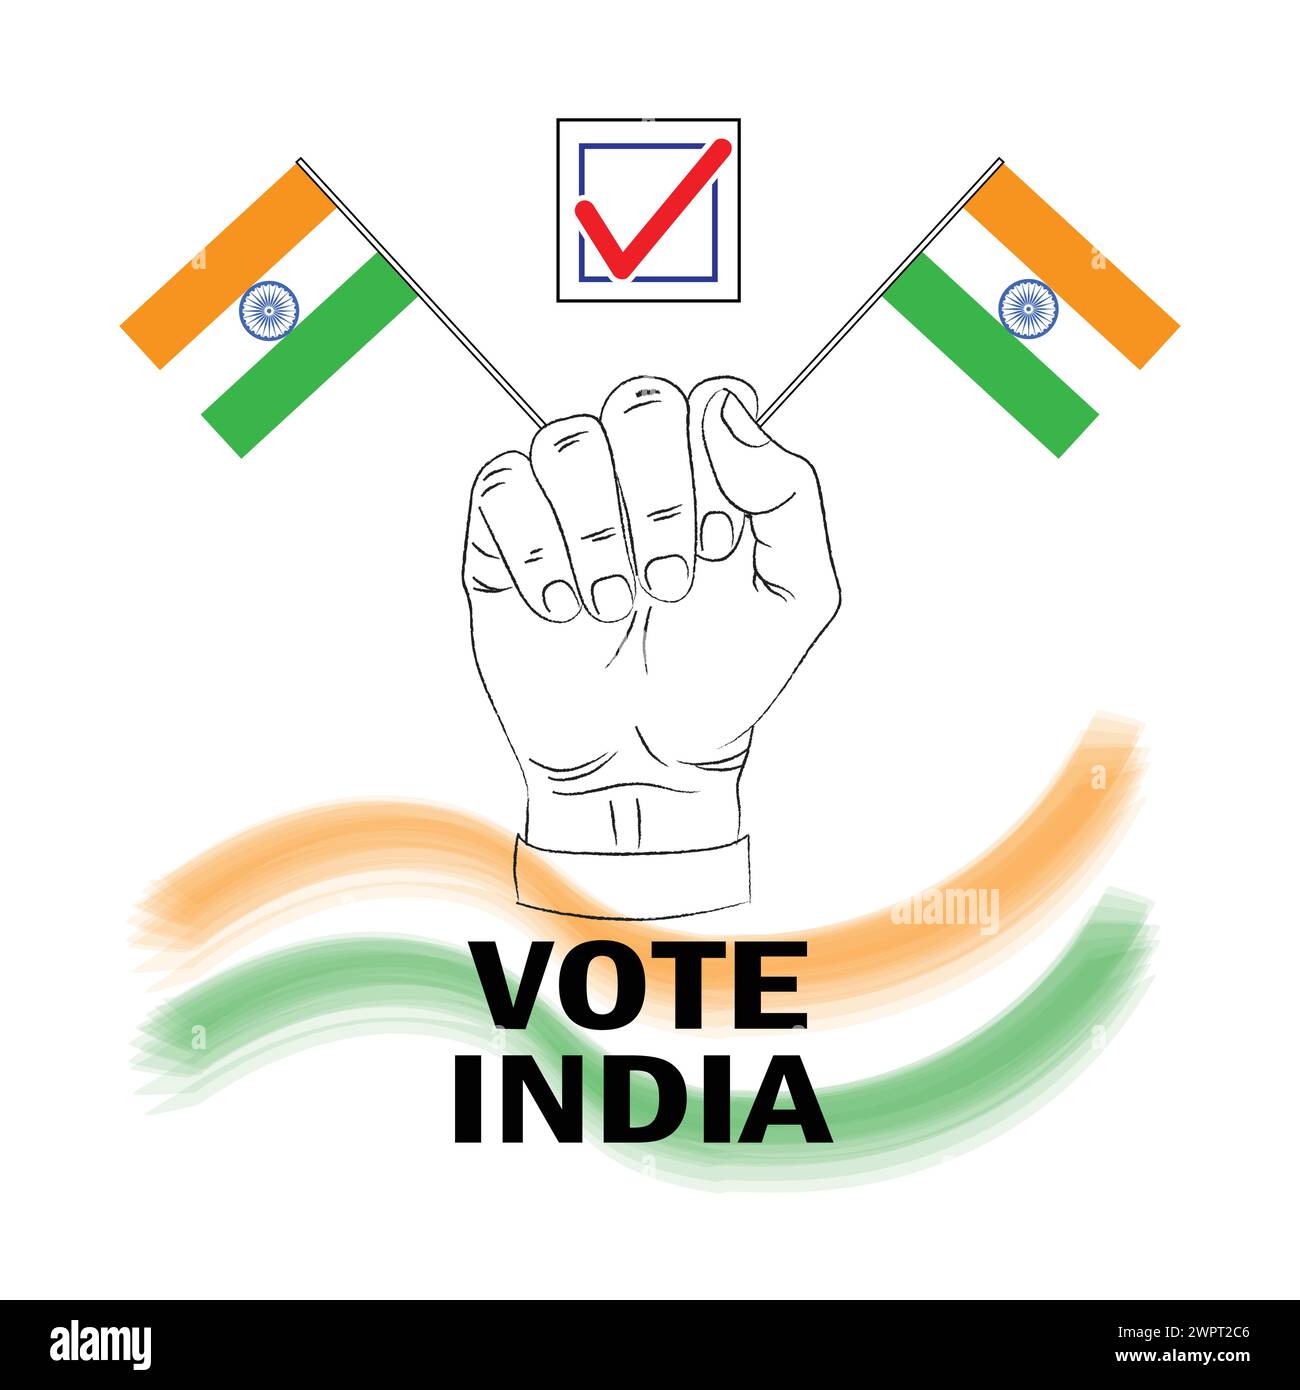 Vote India banner with hand fist showing voter's power, tricolor flag, India election, vector illustration Stock Vector